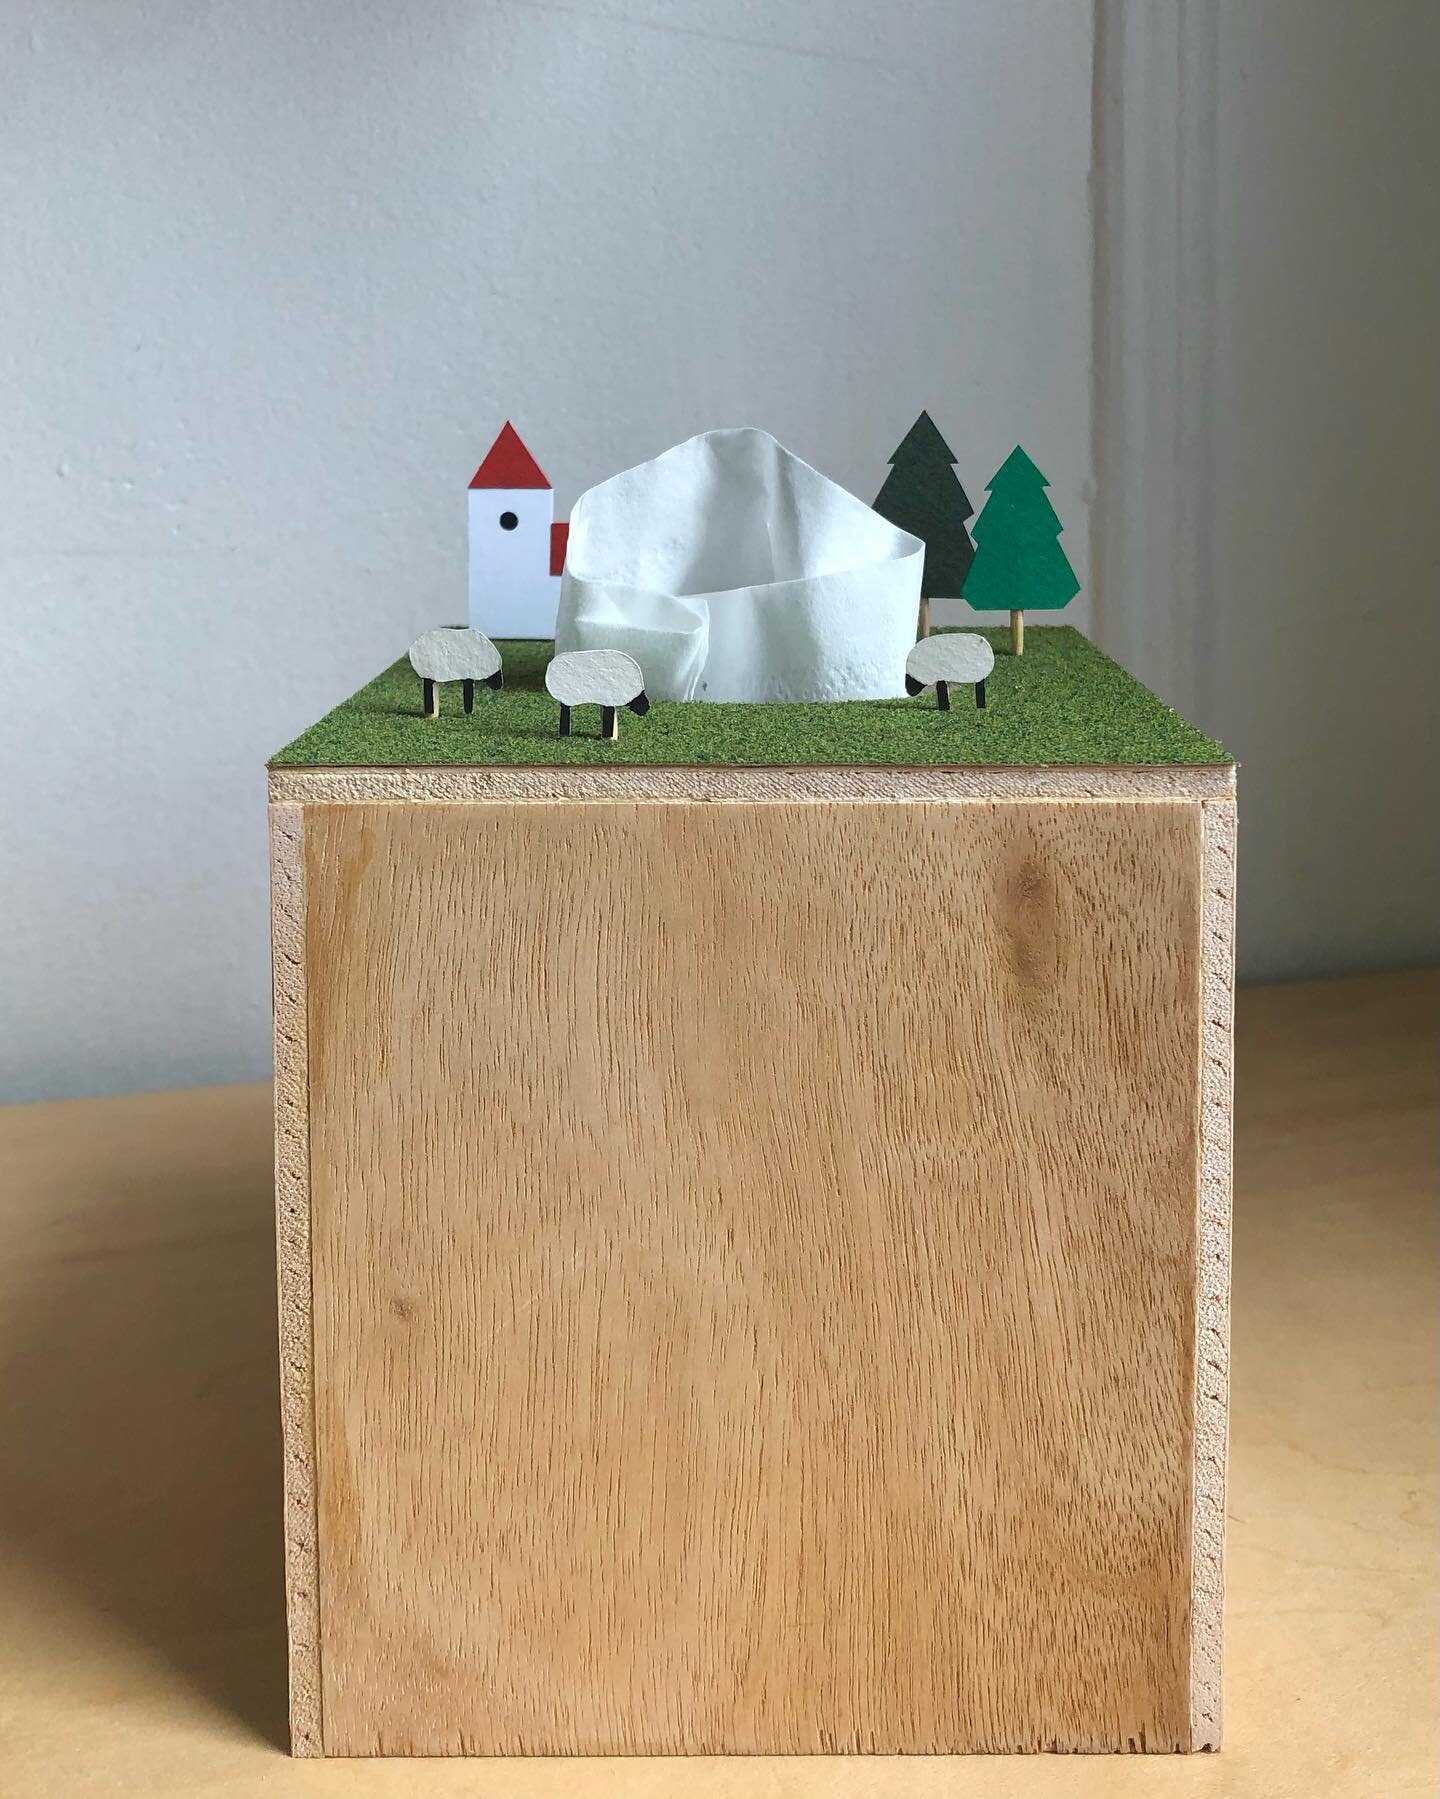 pastoral (tissue box)
edition of 4
plywood, paper, model grass, toothpicks, ink
7.25 x 5 x 5 inches